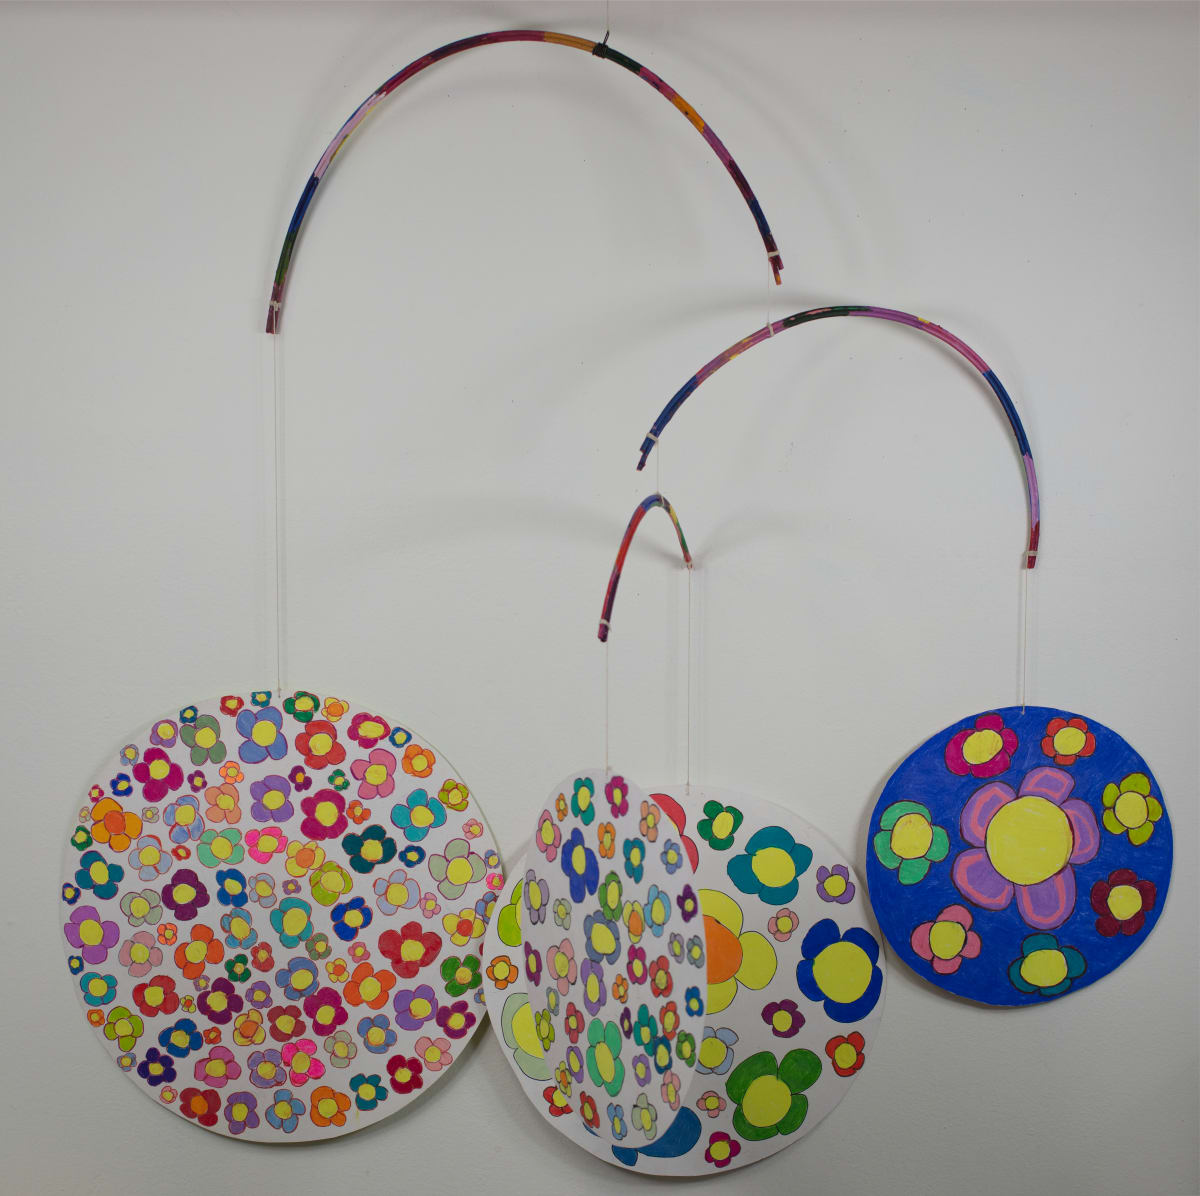 Large Flower Power Mobile by Cindy Johnson  Image: two-sided suspended drawings of flowers